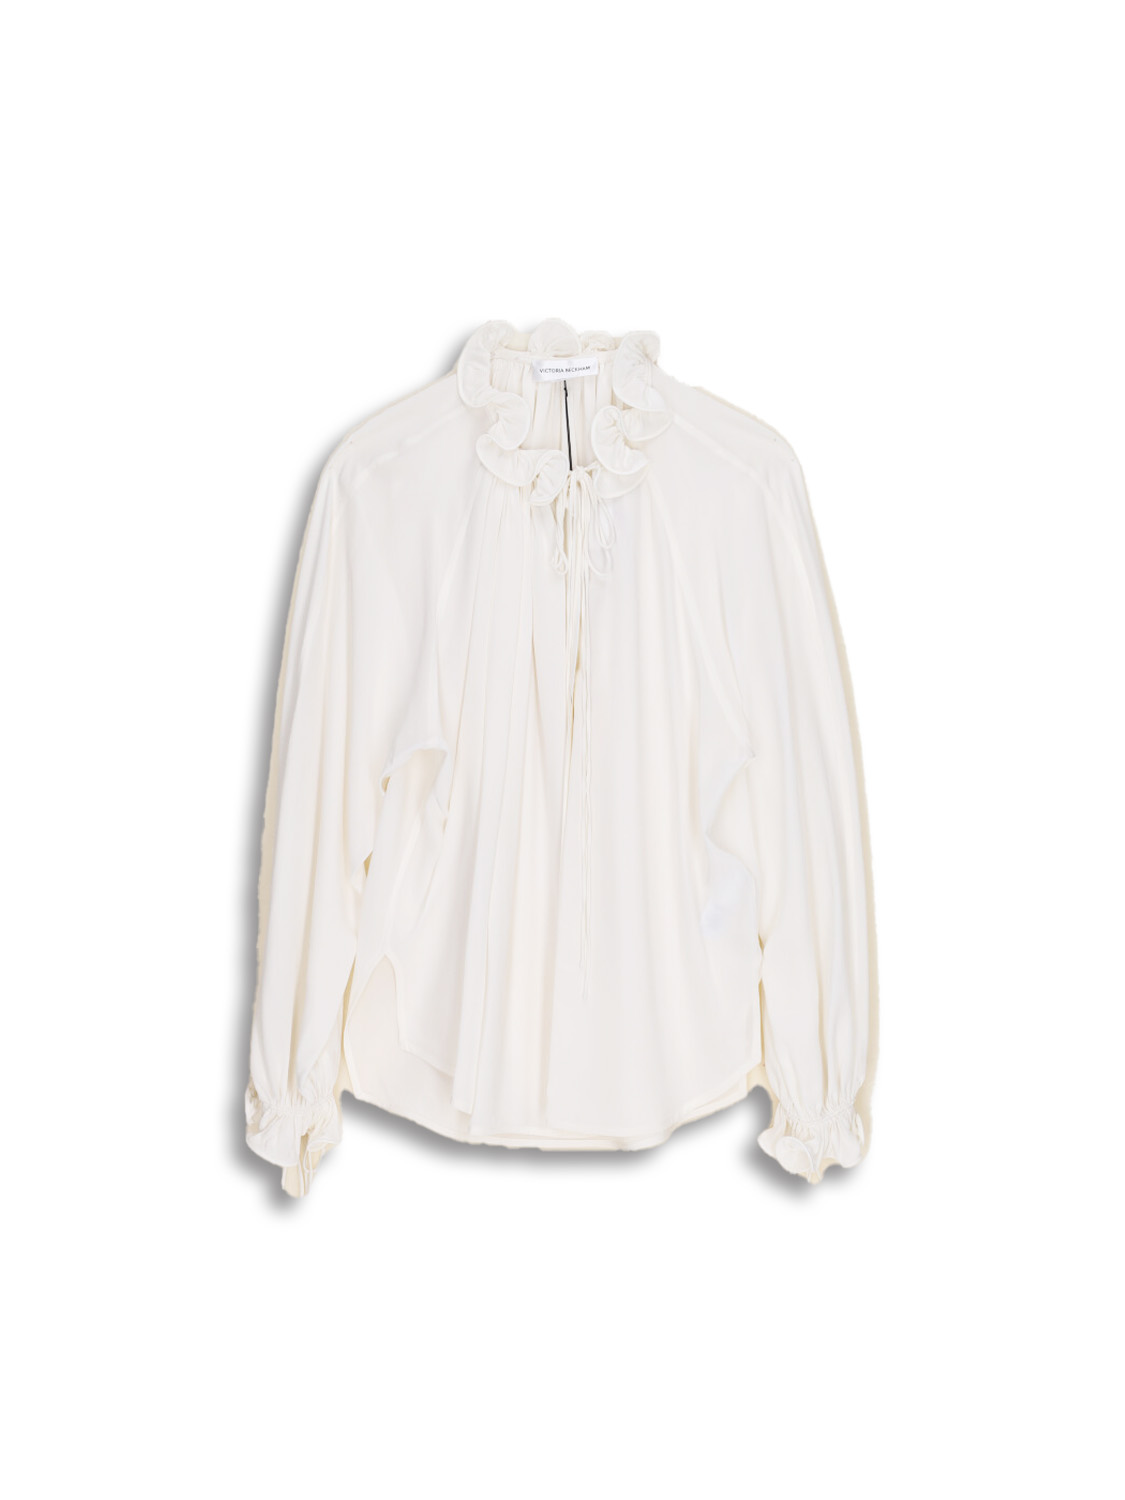 Ruched Detail Blouse - Long Sleeve Blouse with Ruched Details made of Silk